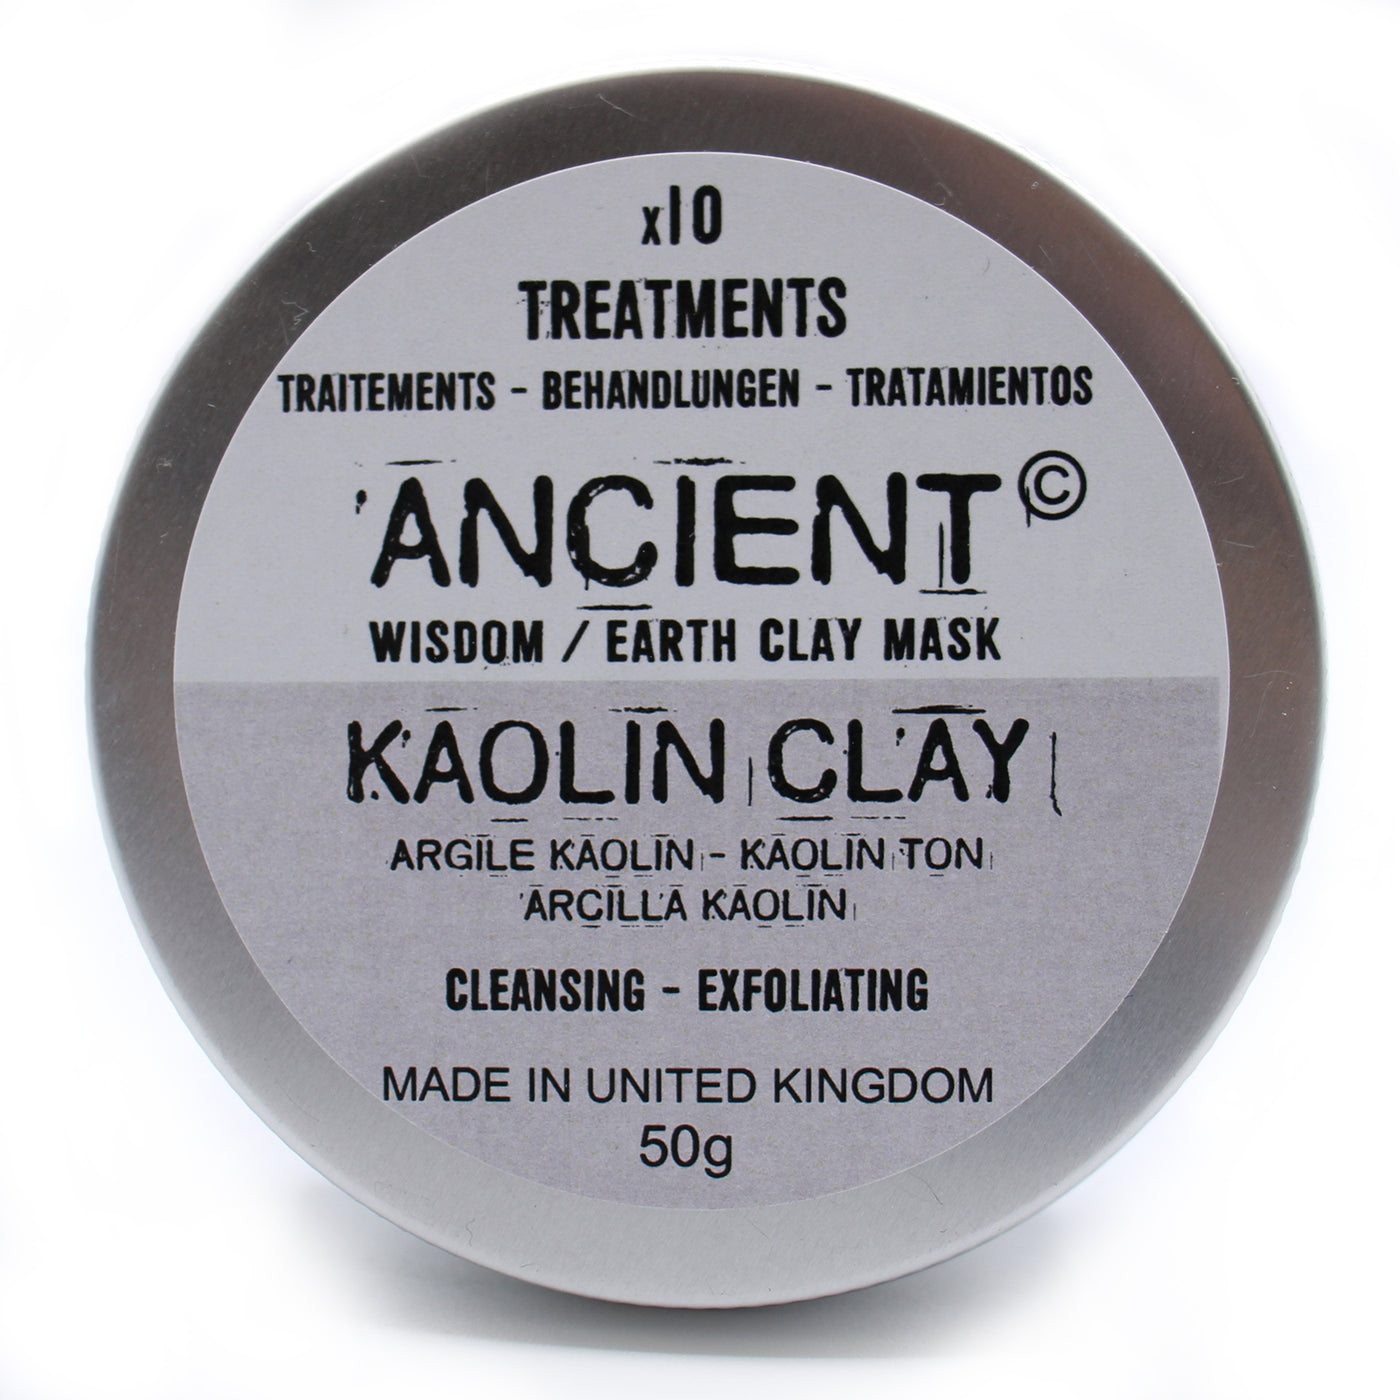 Kaolin Cleansing & Exfoliating Clay Face Mask - 50g.